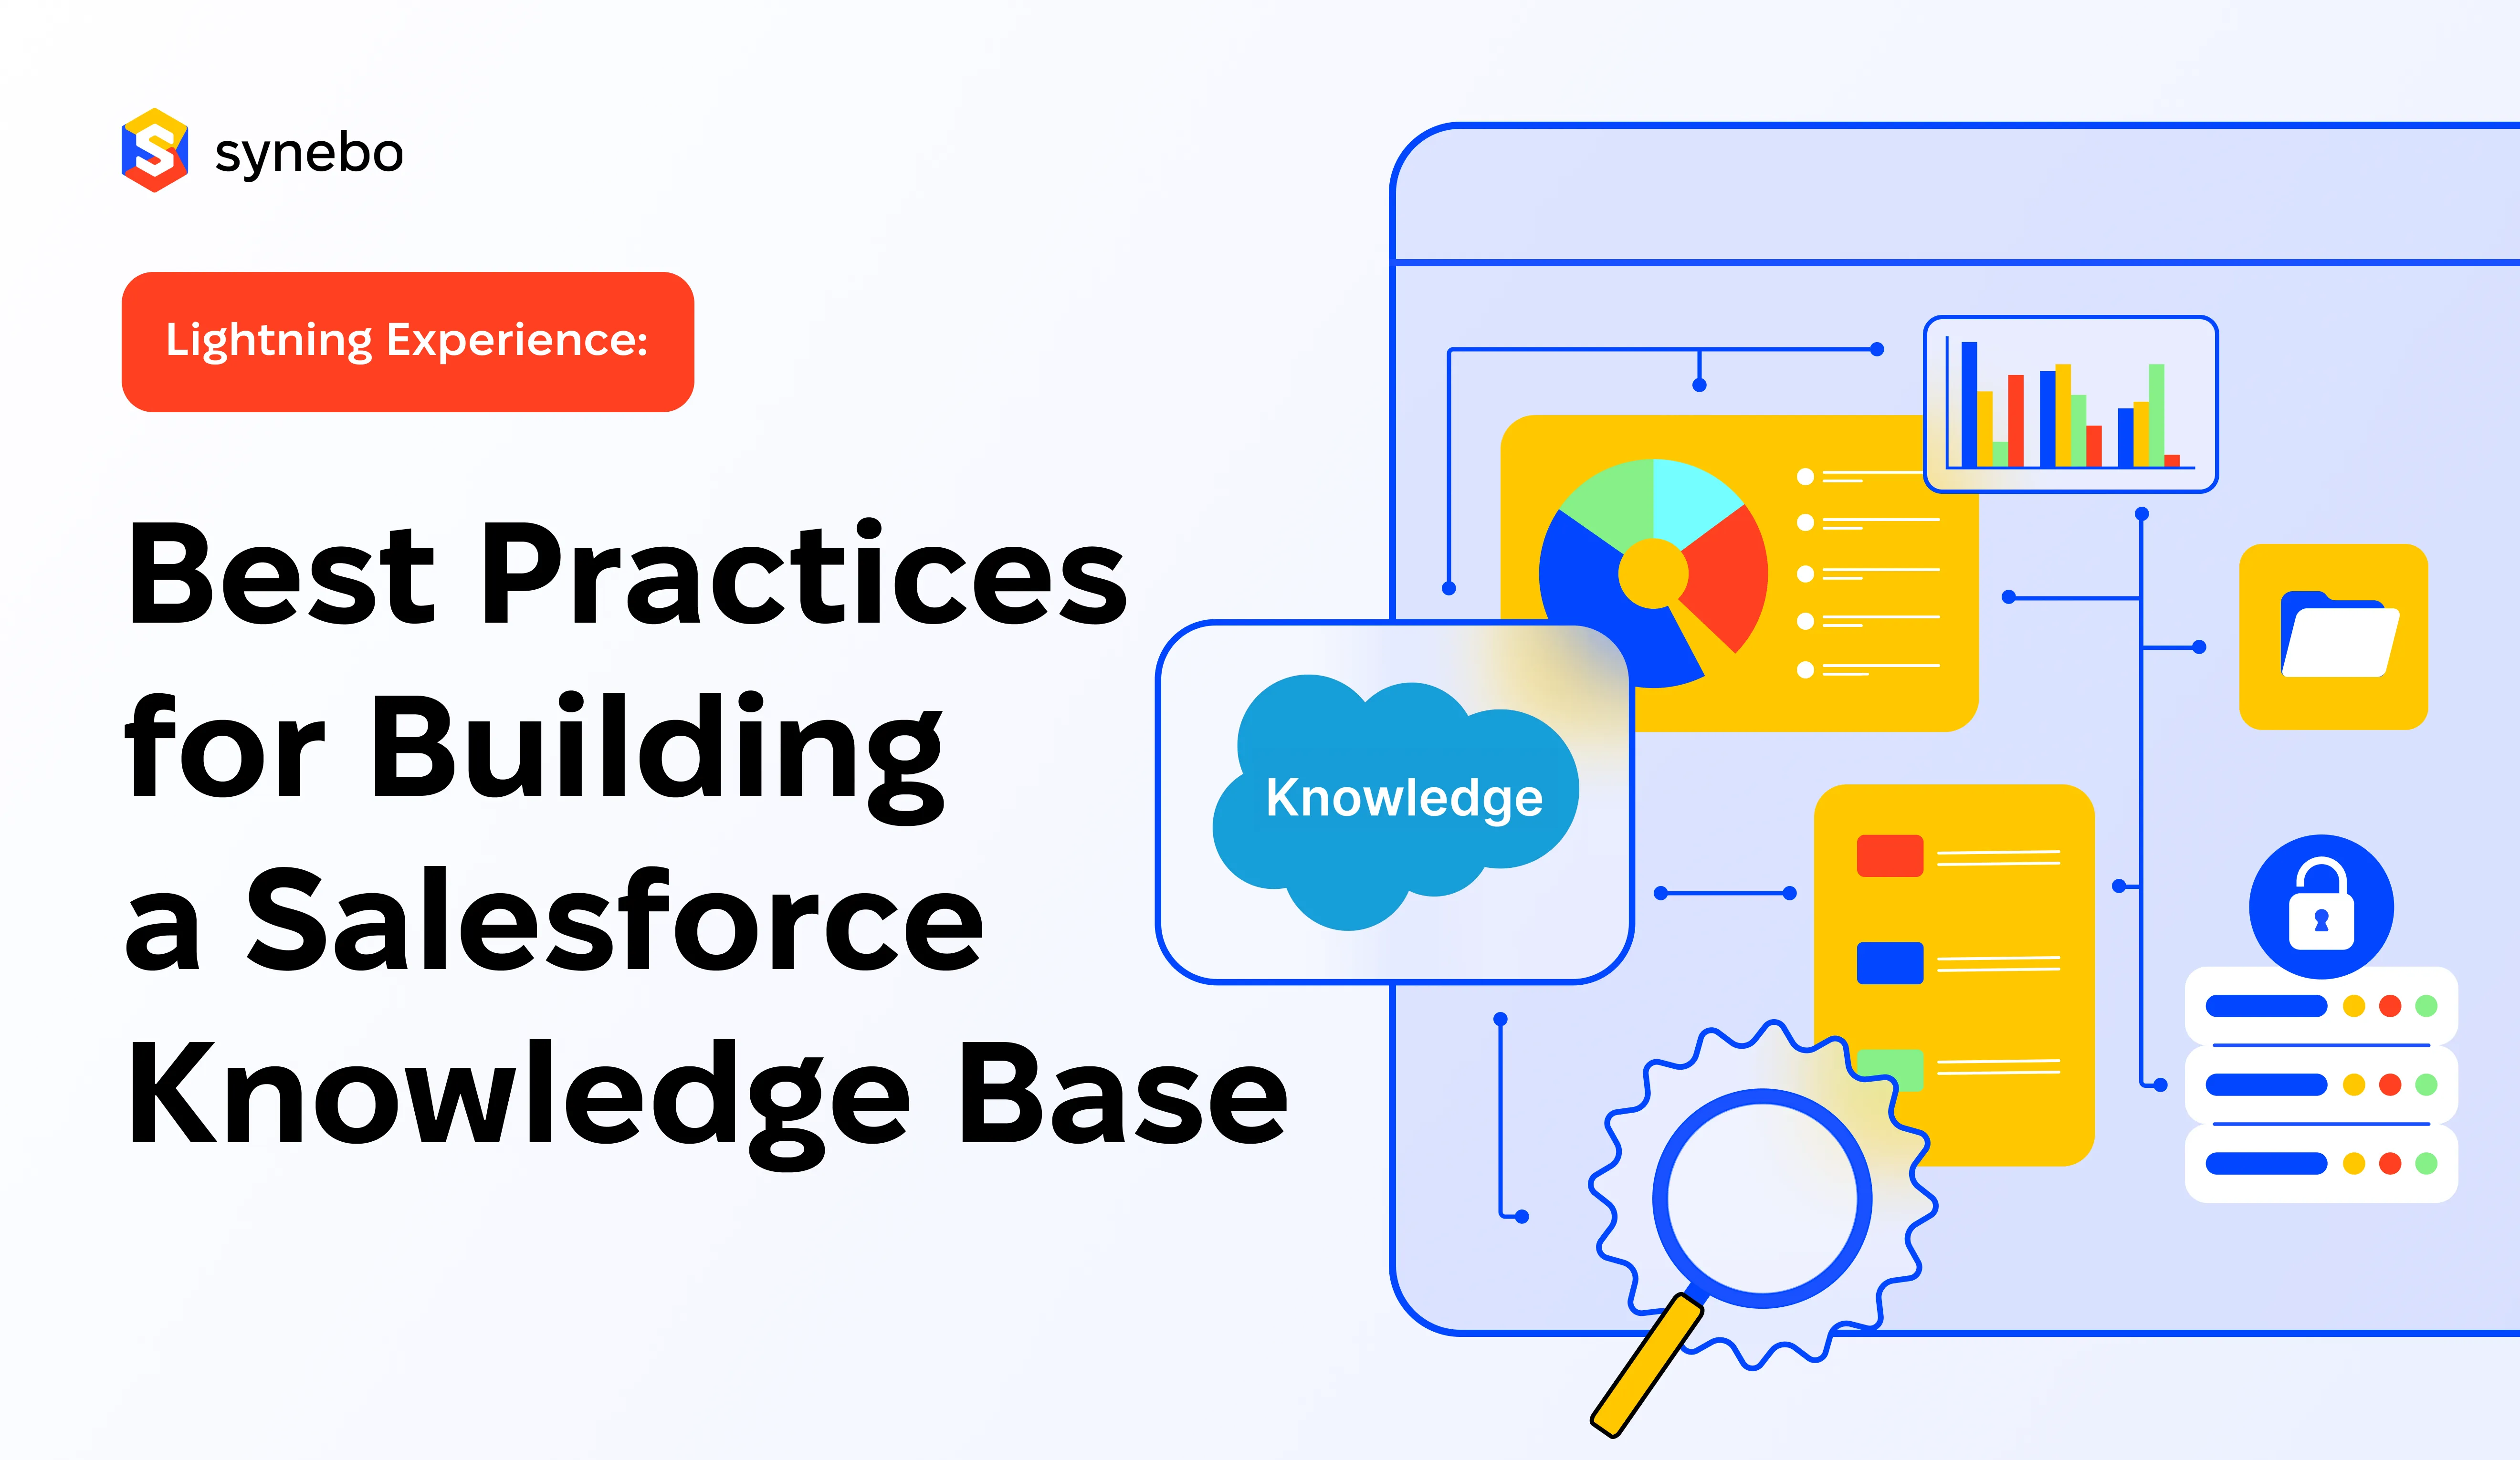 Best Practices for Building a Salesforce Knowledge Base in Lightning Experience